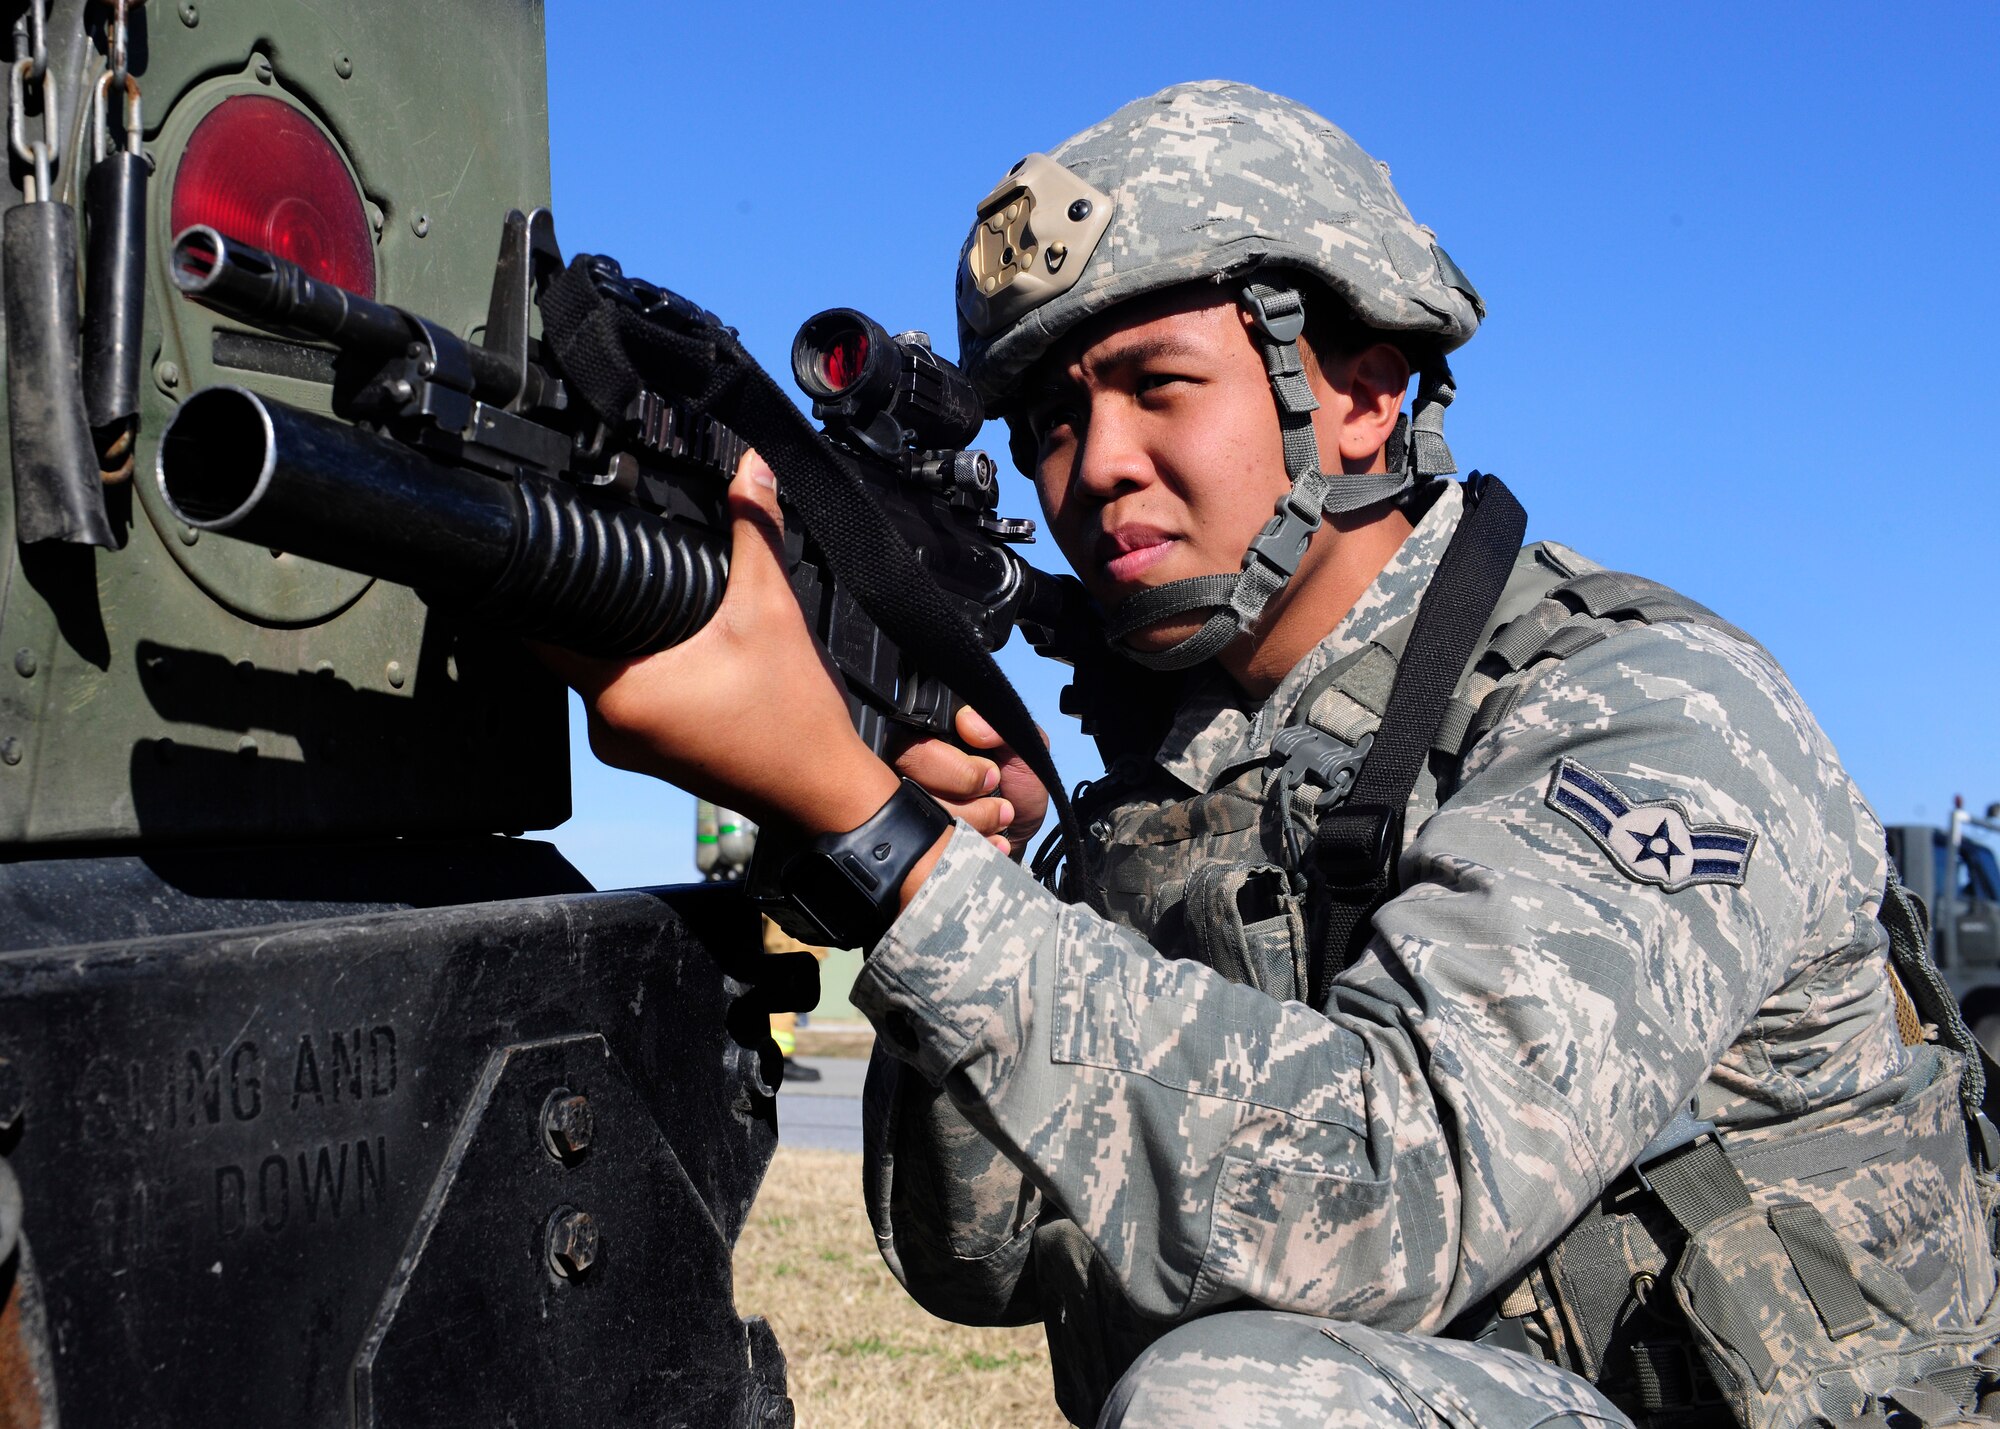 Airman 1st Class Jordanrey Queral, 39th Security Forces Squadron security response team member, provides security during a wing exercise Jan. 15, 2016, at Incirlik Air Base, Turkey. Queral ensured the area was secure while fellow defenders practiced body searching techniques on simulated opposing forces. (U.S. Air Force photo by Senior Airman Krystal Ardrey/Released)